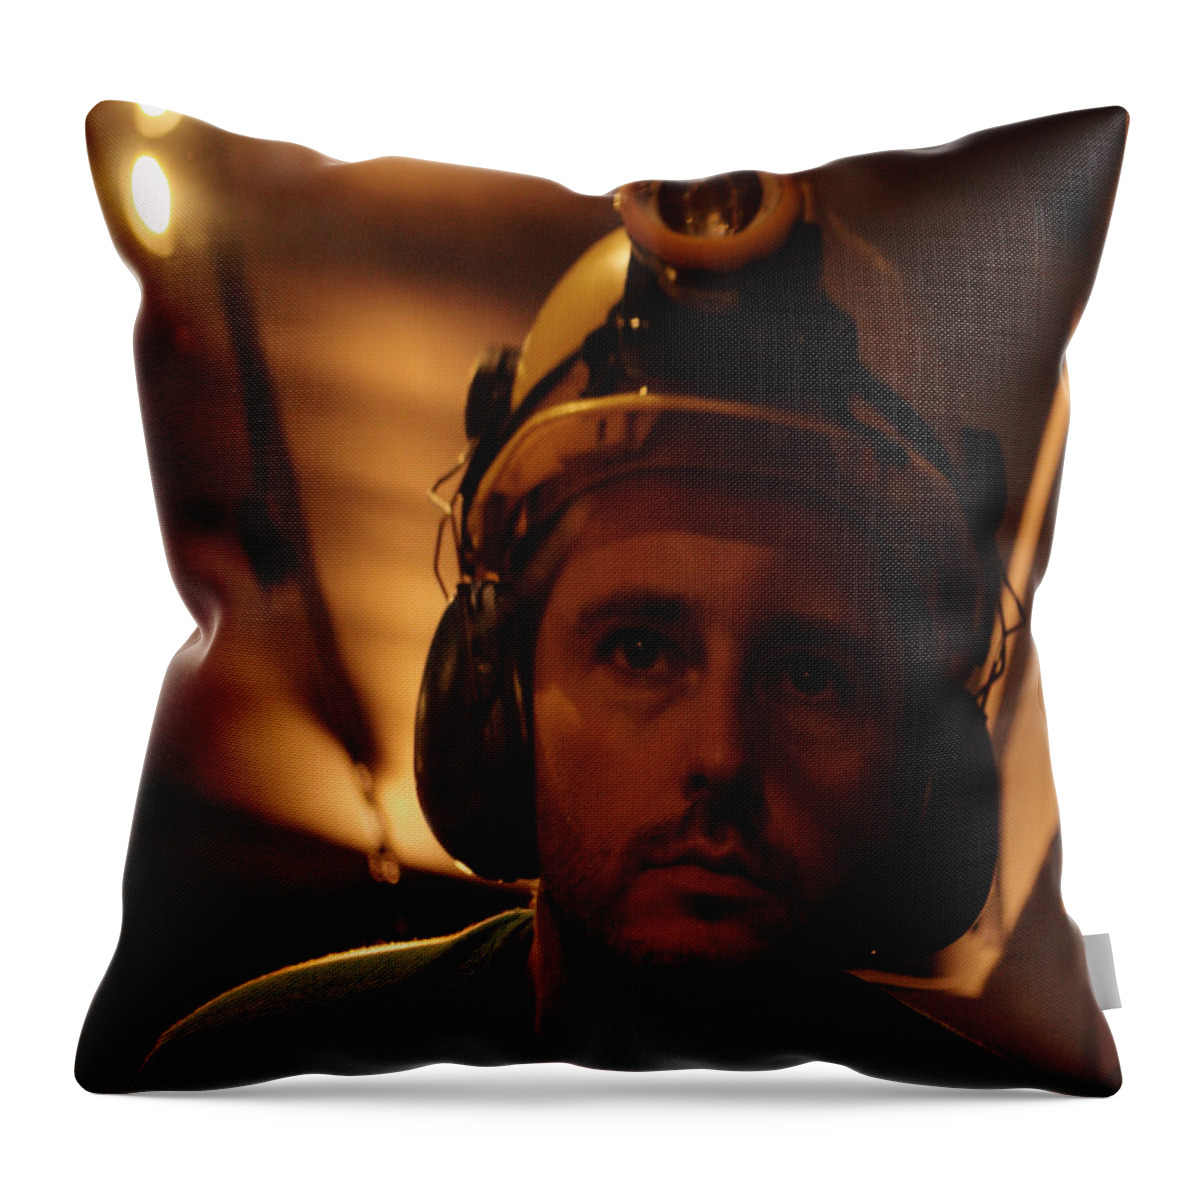 Portrait Throw Pillow featuring the photograph New Miner by Adrian Wale